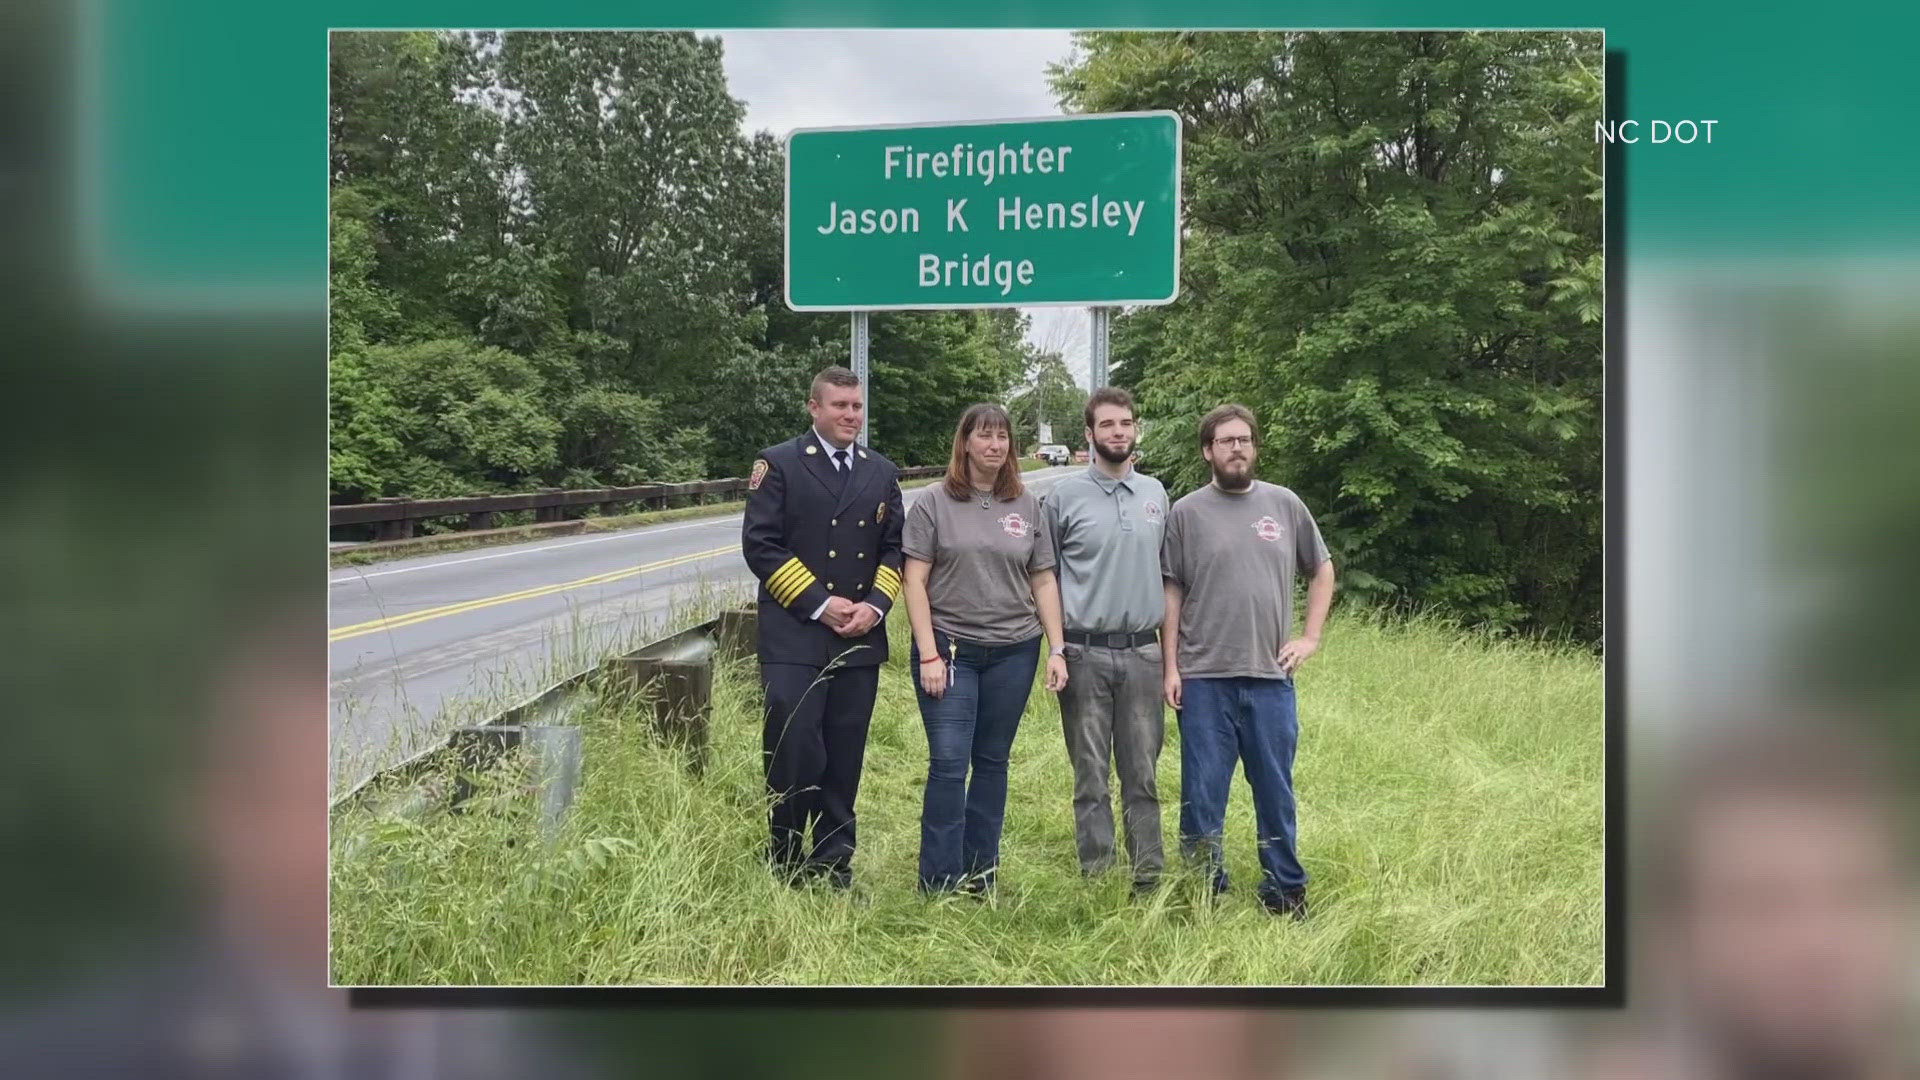 A Burke County bridge now bears the name of a firefighter killed while clearing storm debris in 2017.